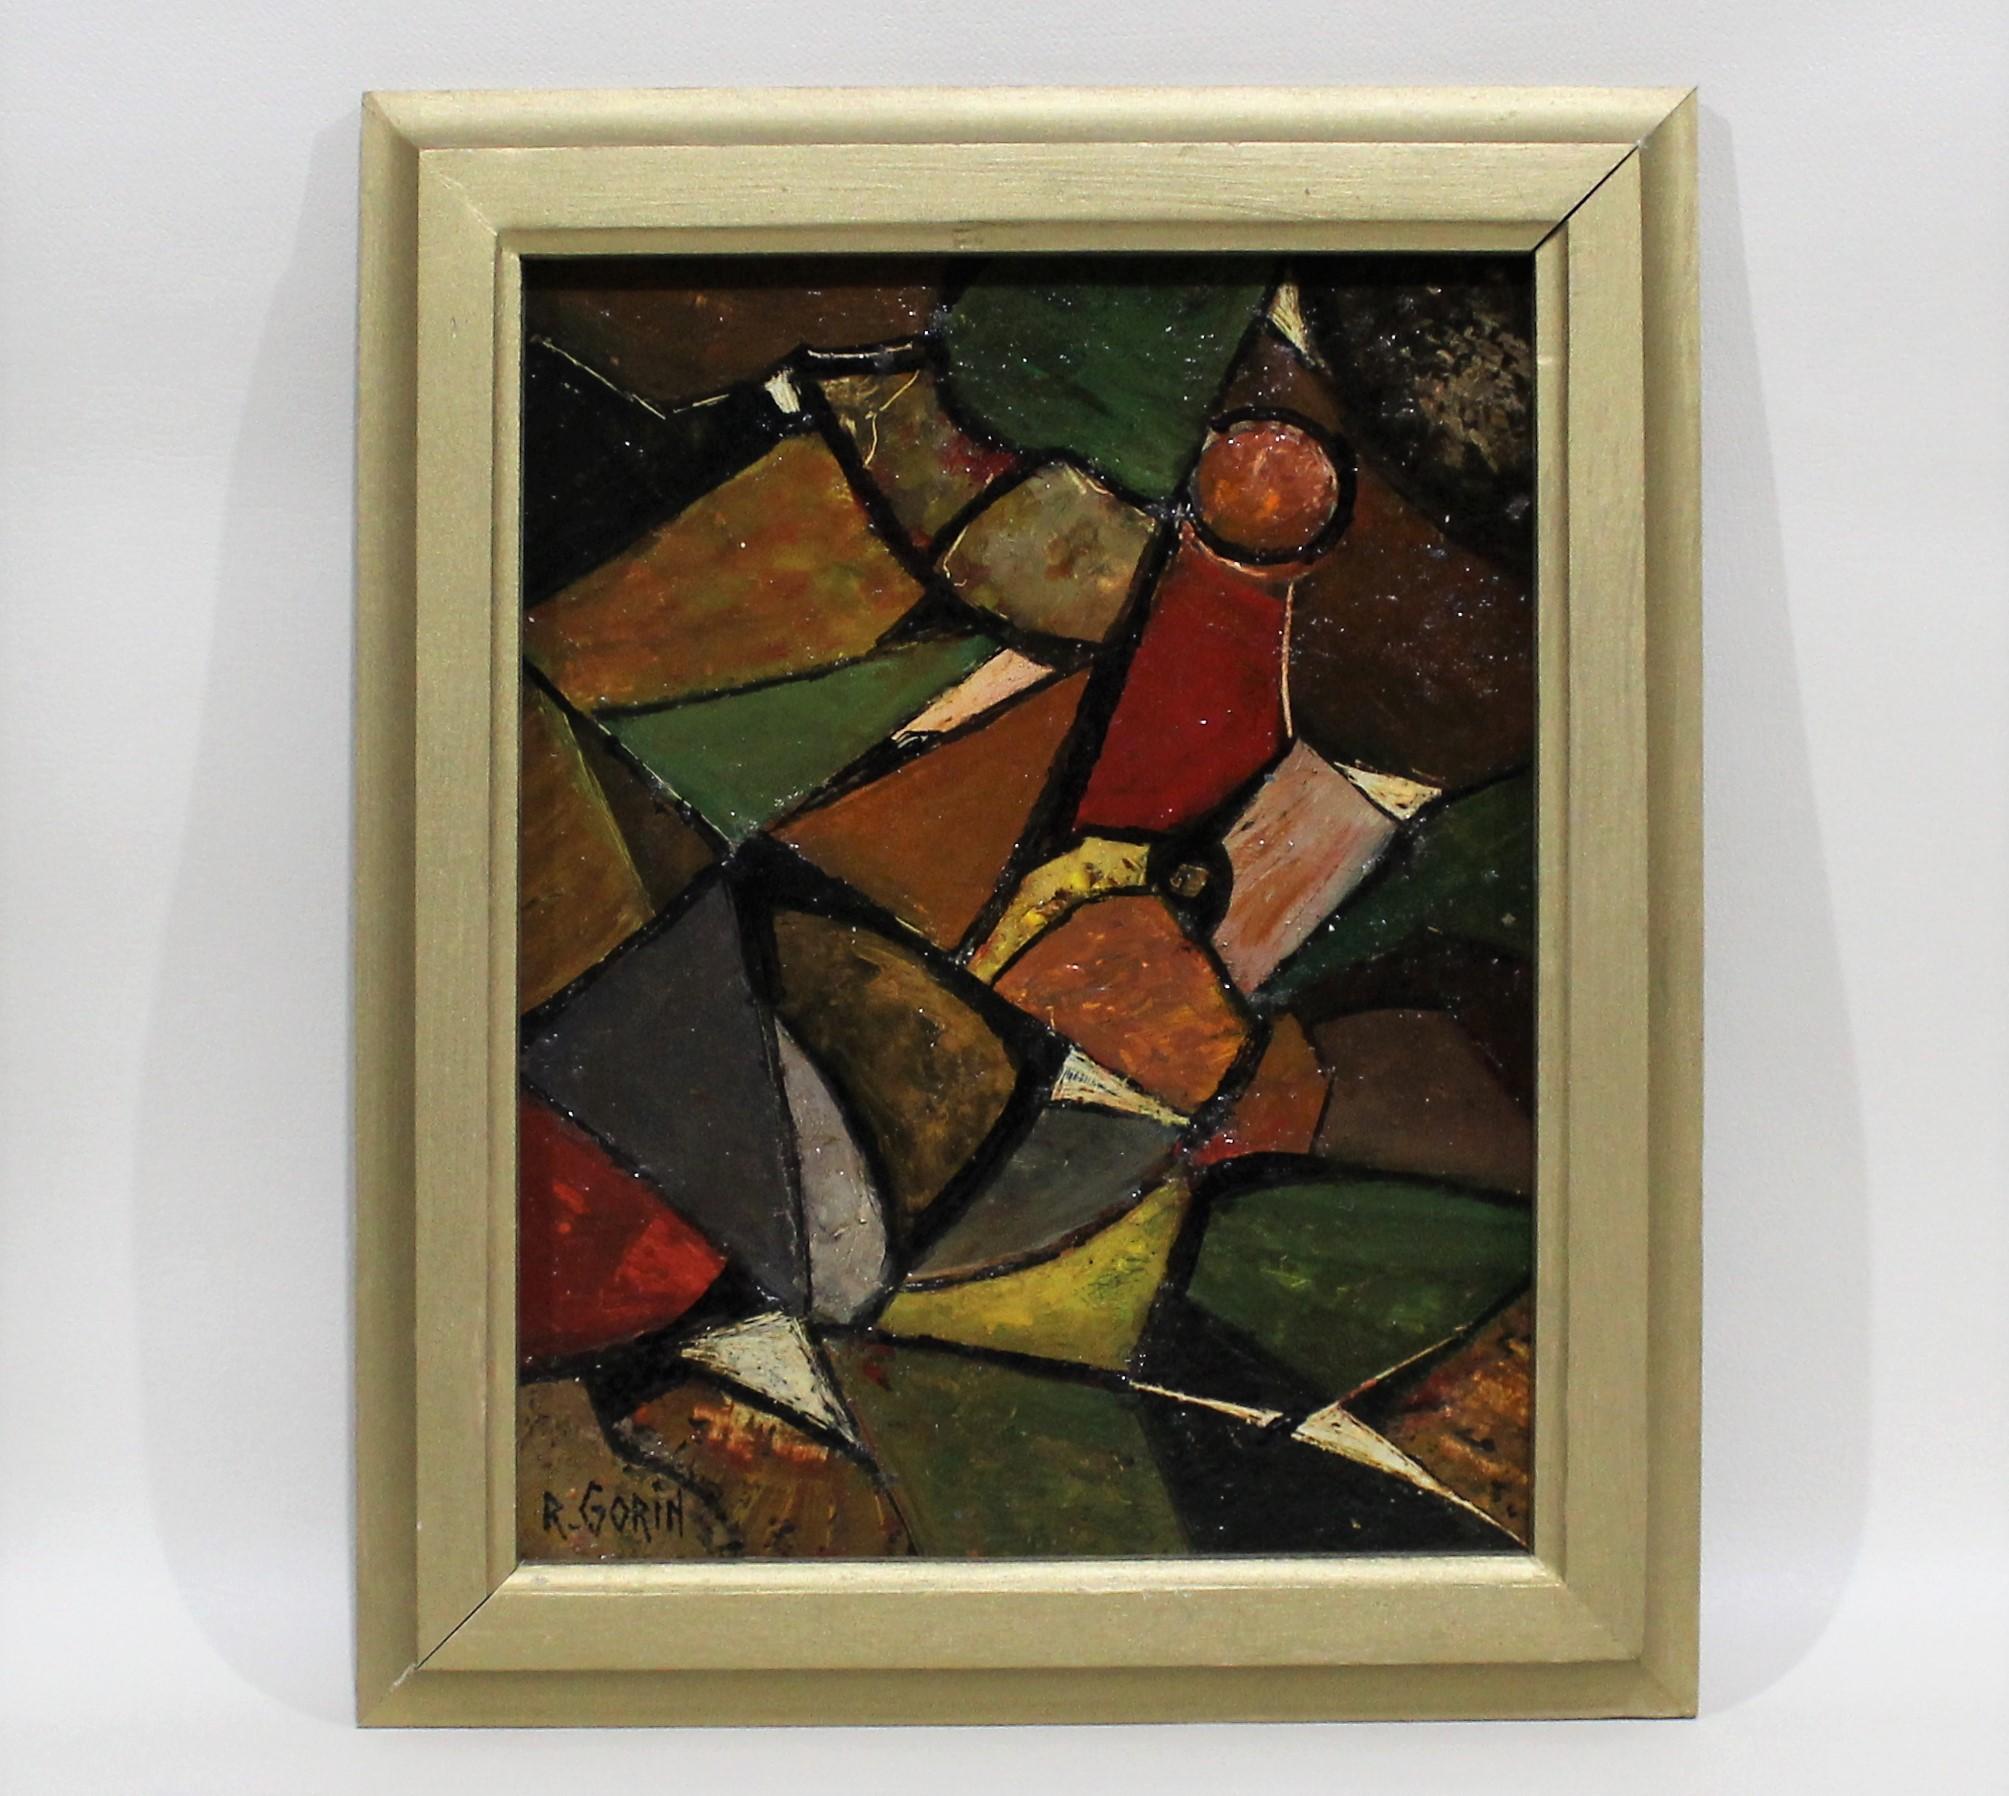 Abstract painting by the French visual artist Robert Gorin.
Size with frame 9.25